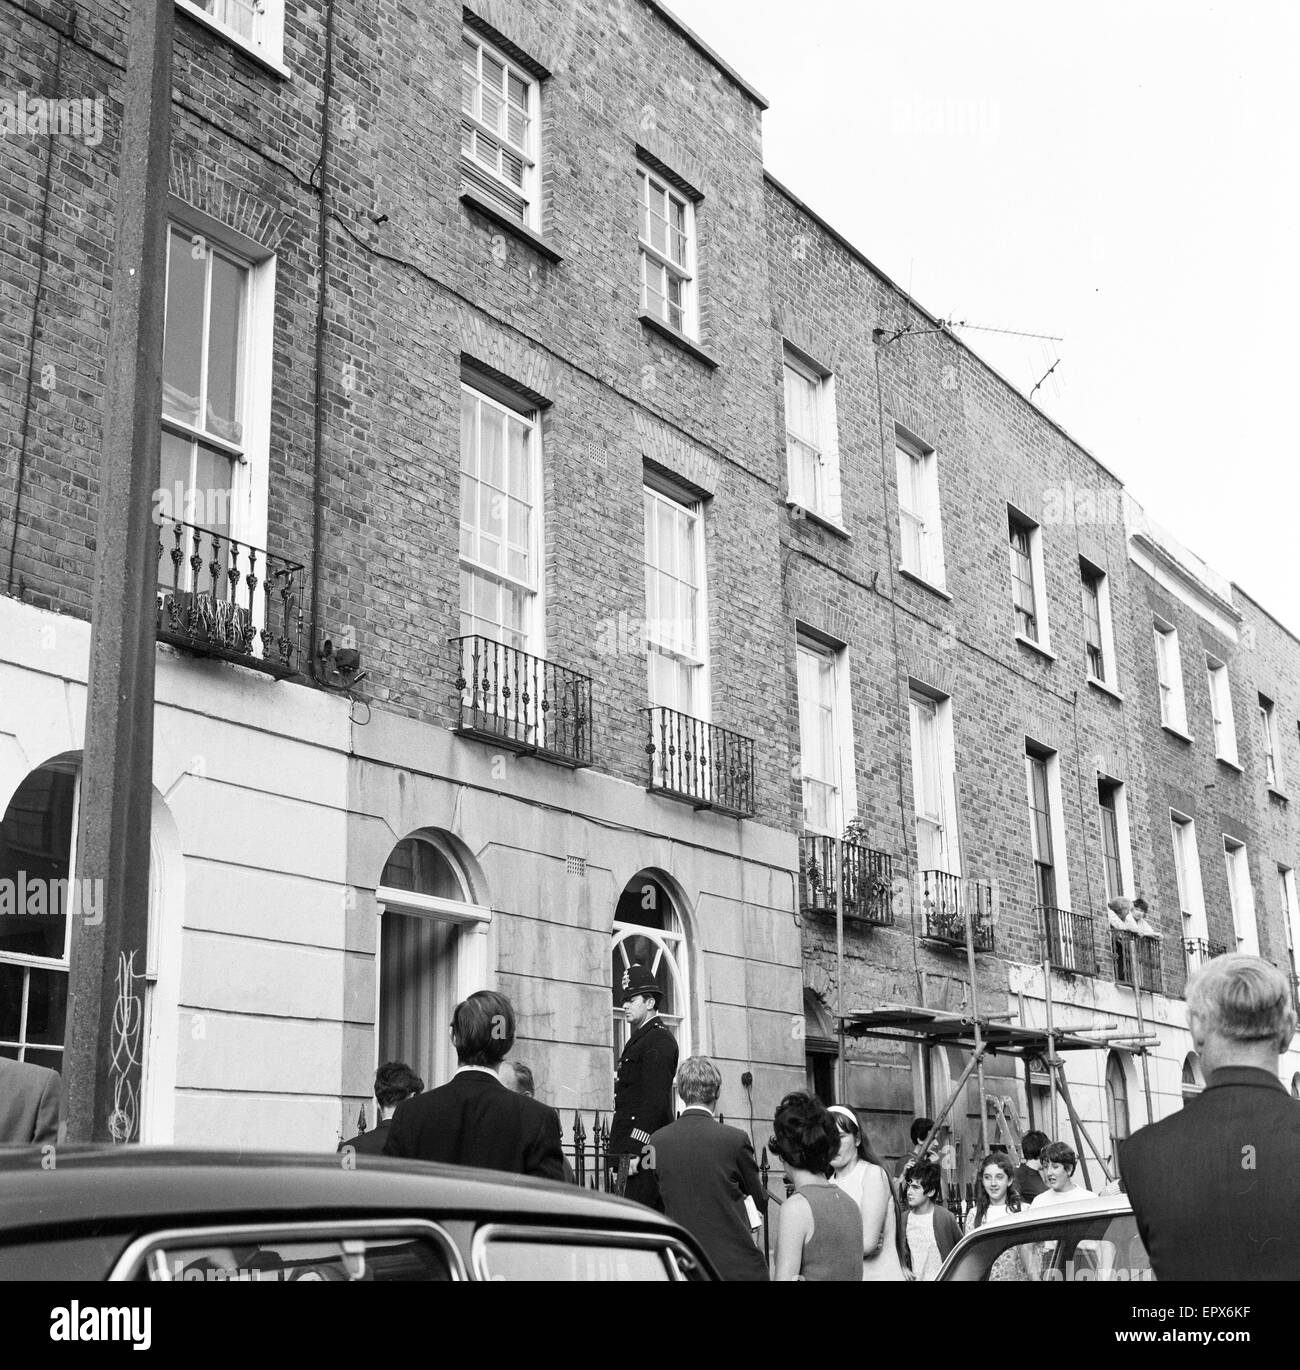 Crime Scene, 25 Noel Road, Islington, North London, where the bodies of two men, Joe Orton and Kenneth Halliwell were discovered in the tope floor flat today, Wednesday 9th August 1967.  Kenneth Halliwell bludgeoned 34-year-old Orton to death at his home Stock Photo